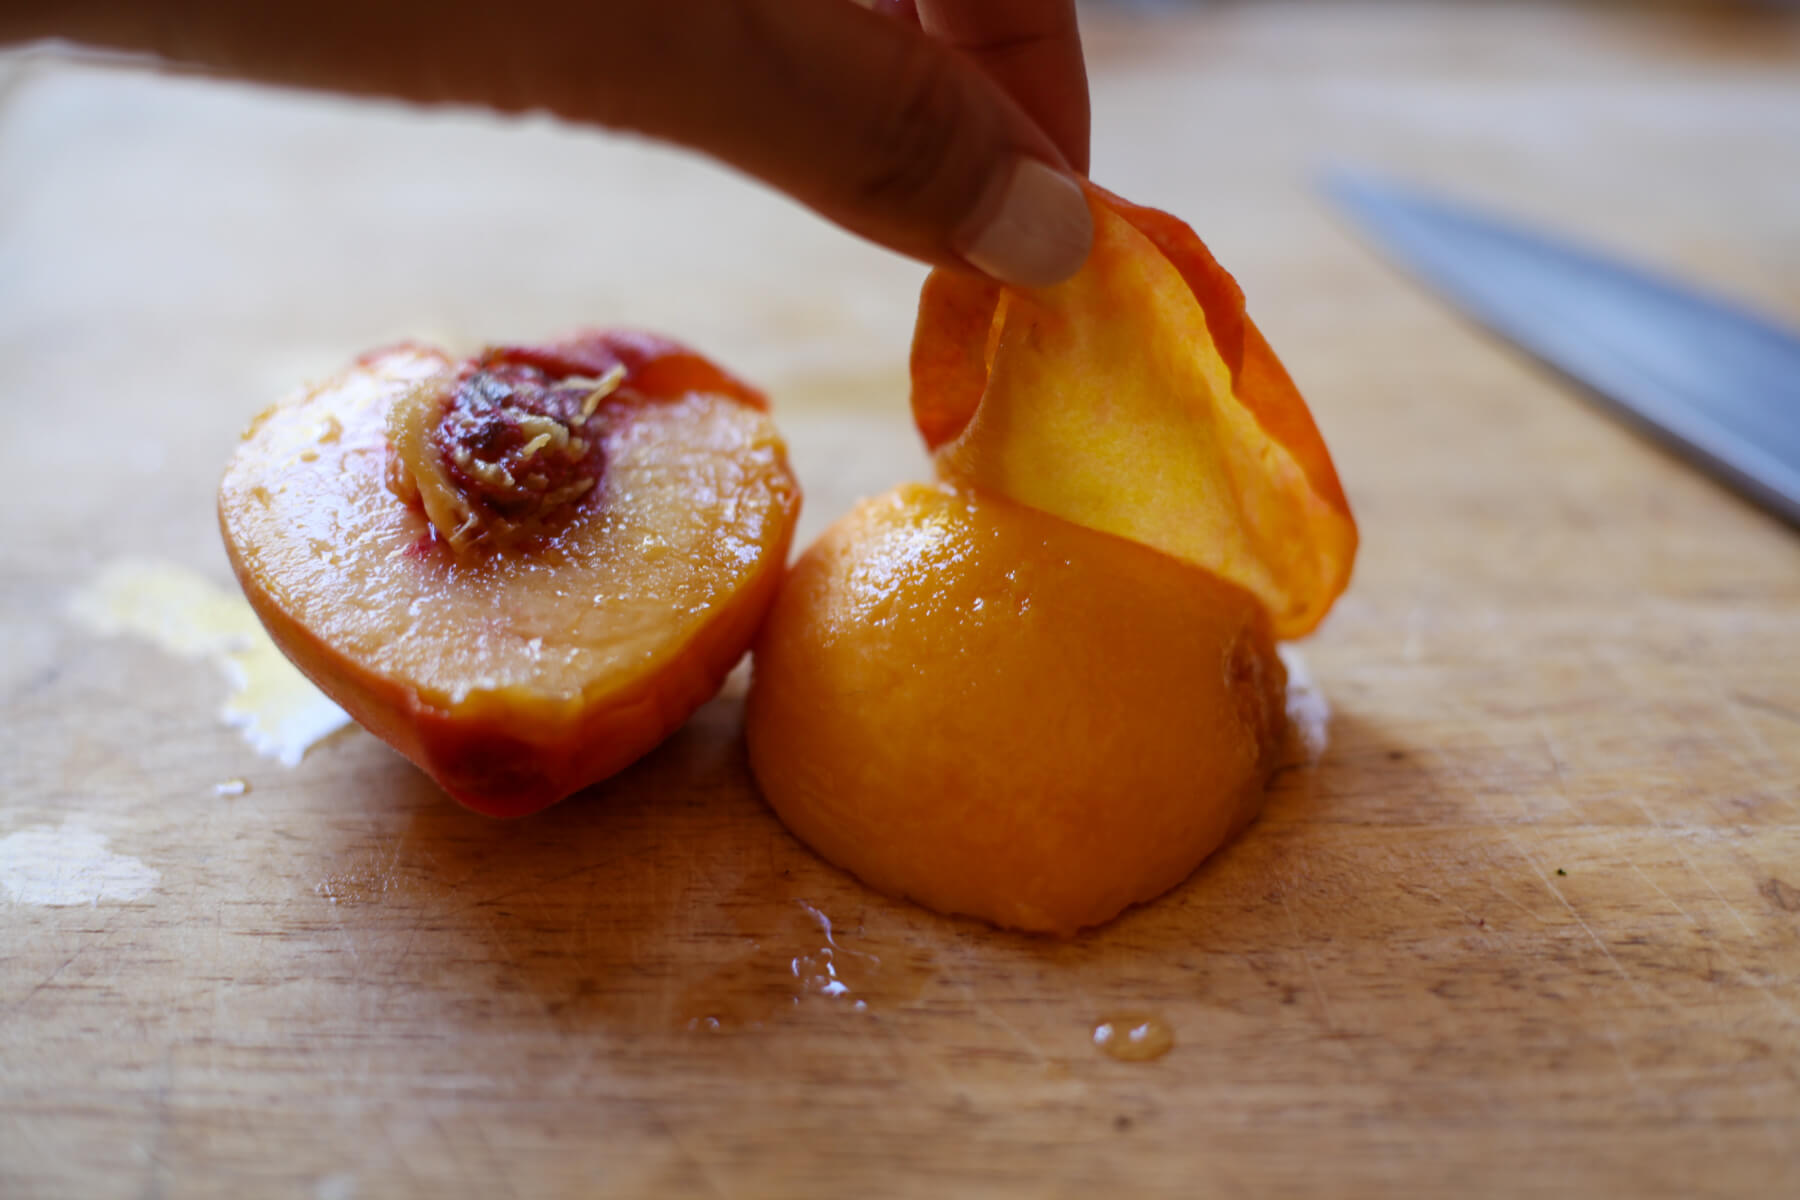 A peach is halved on a cutting board and a hand peels off the skin of one half.